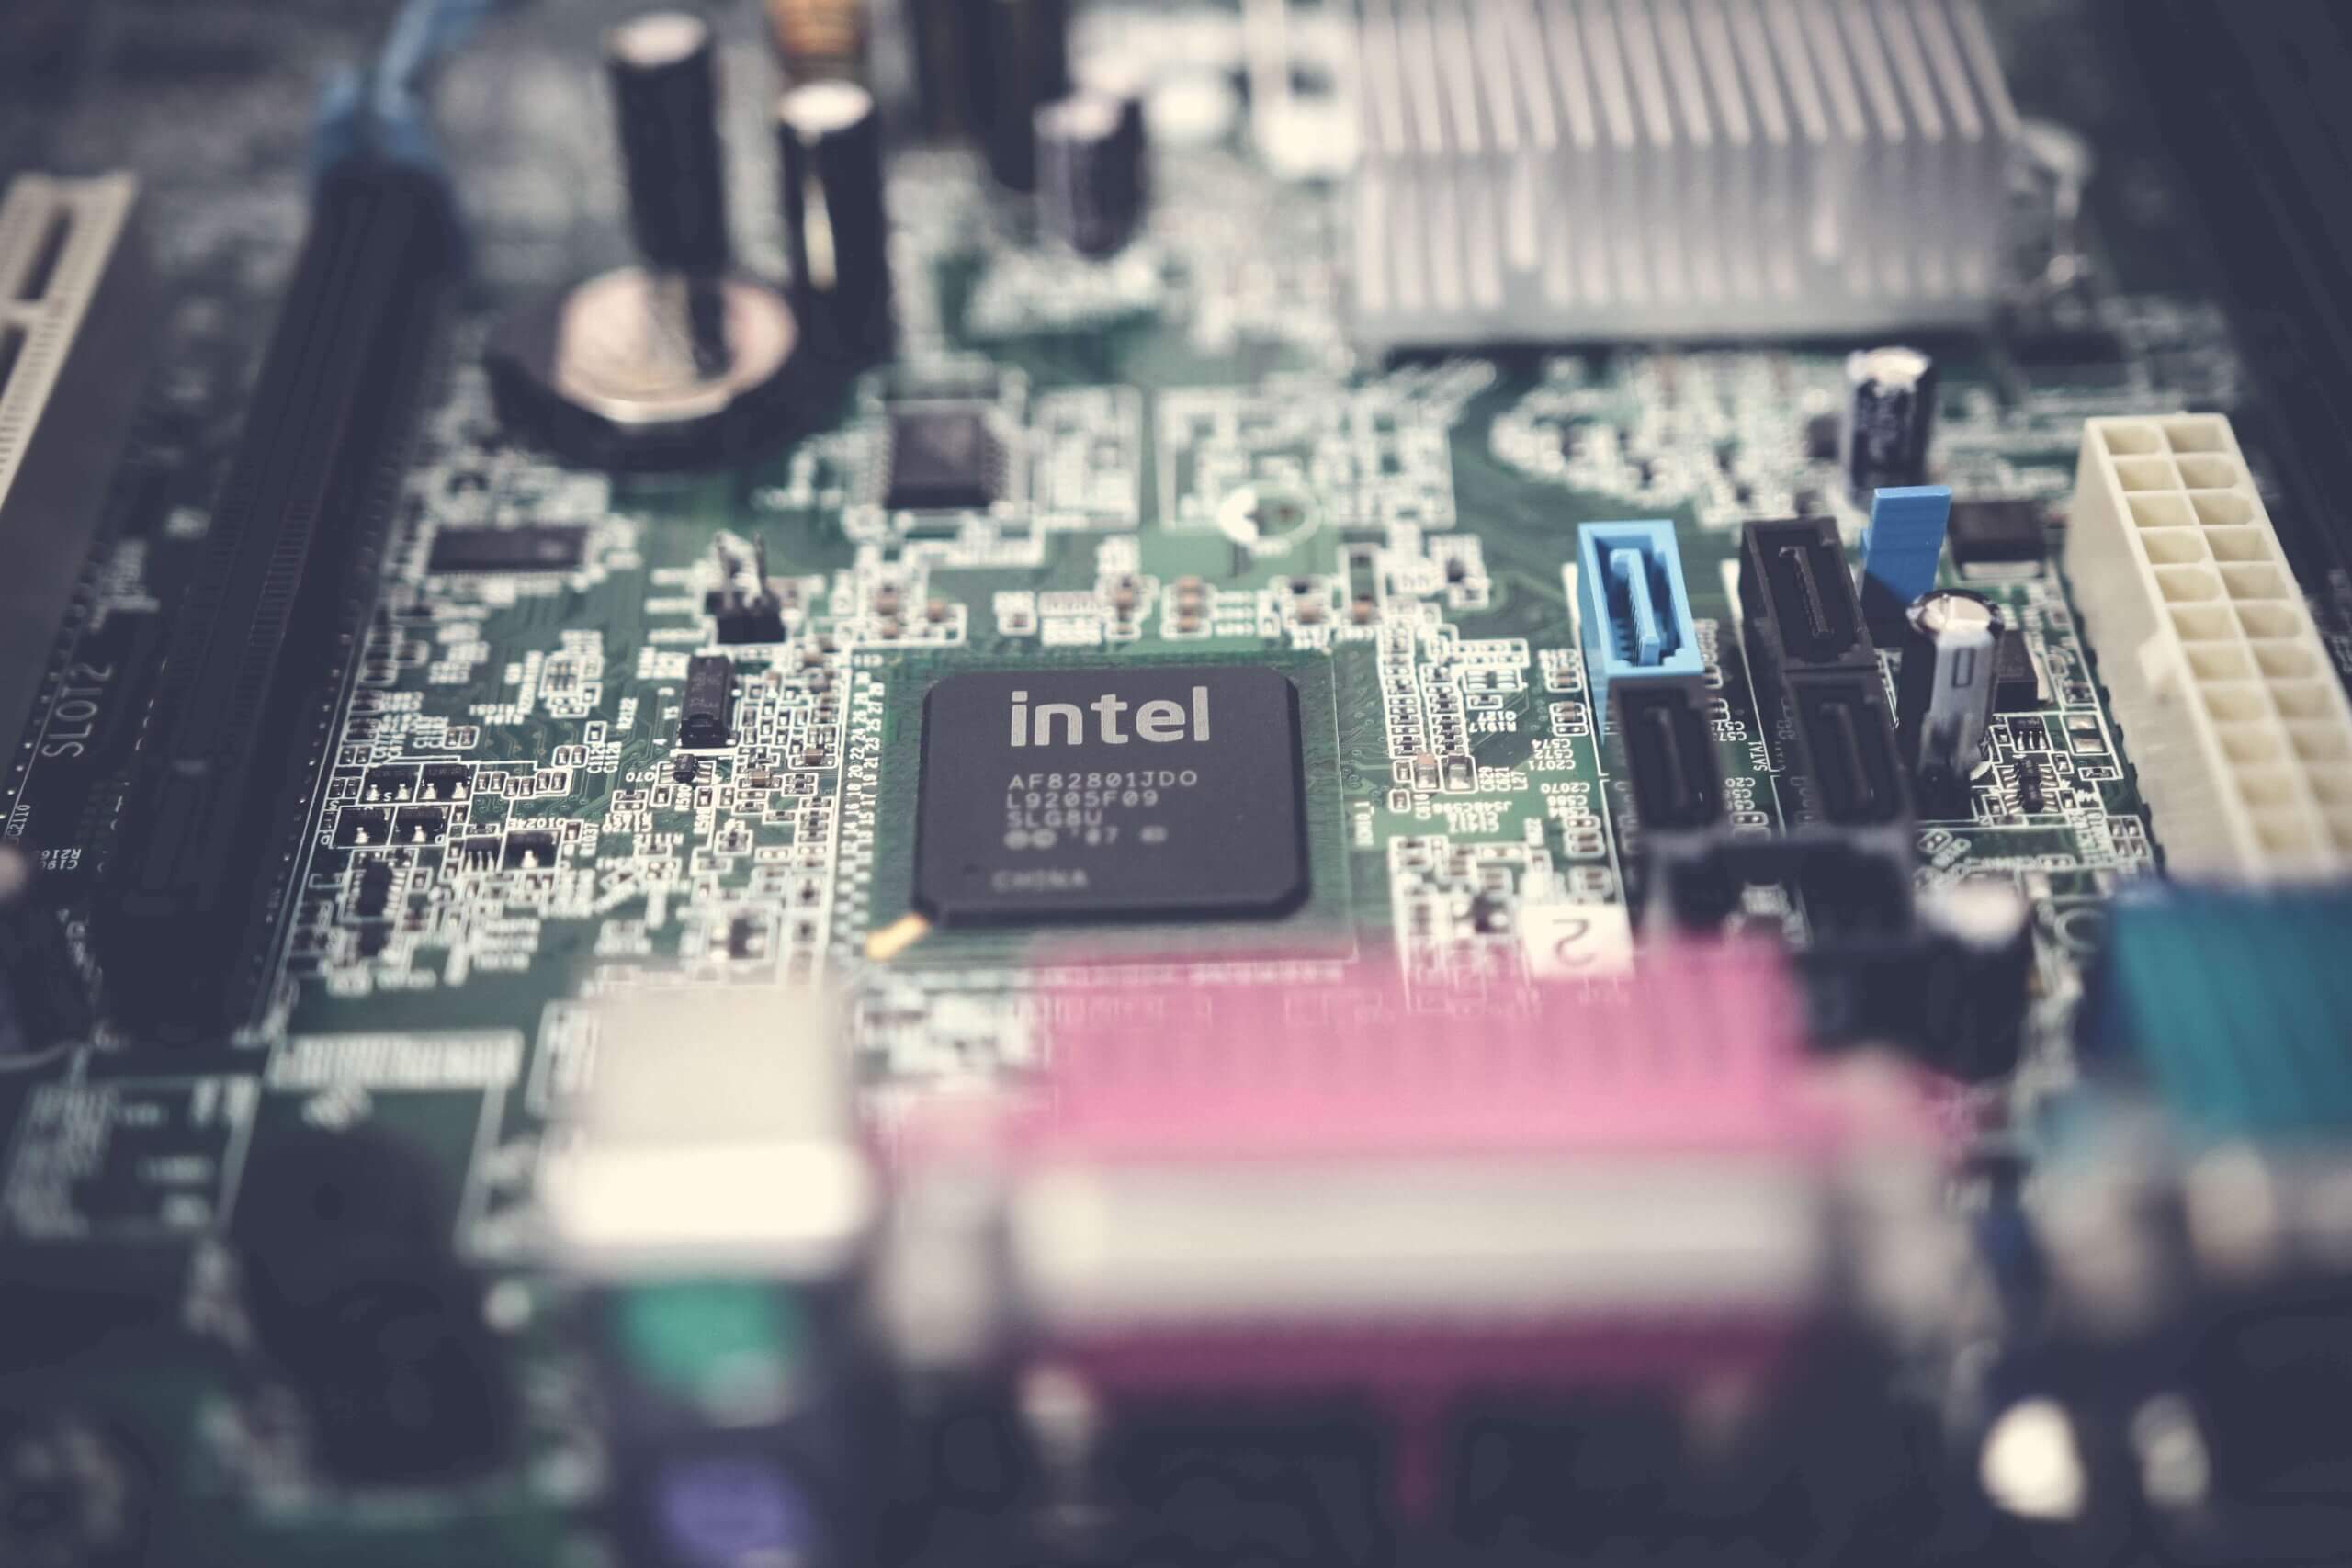 Patent office rules in favour of Intel in VLSI patent case